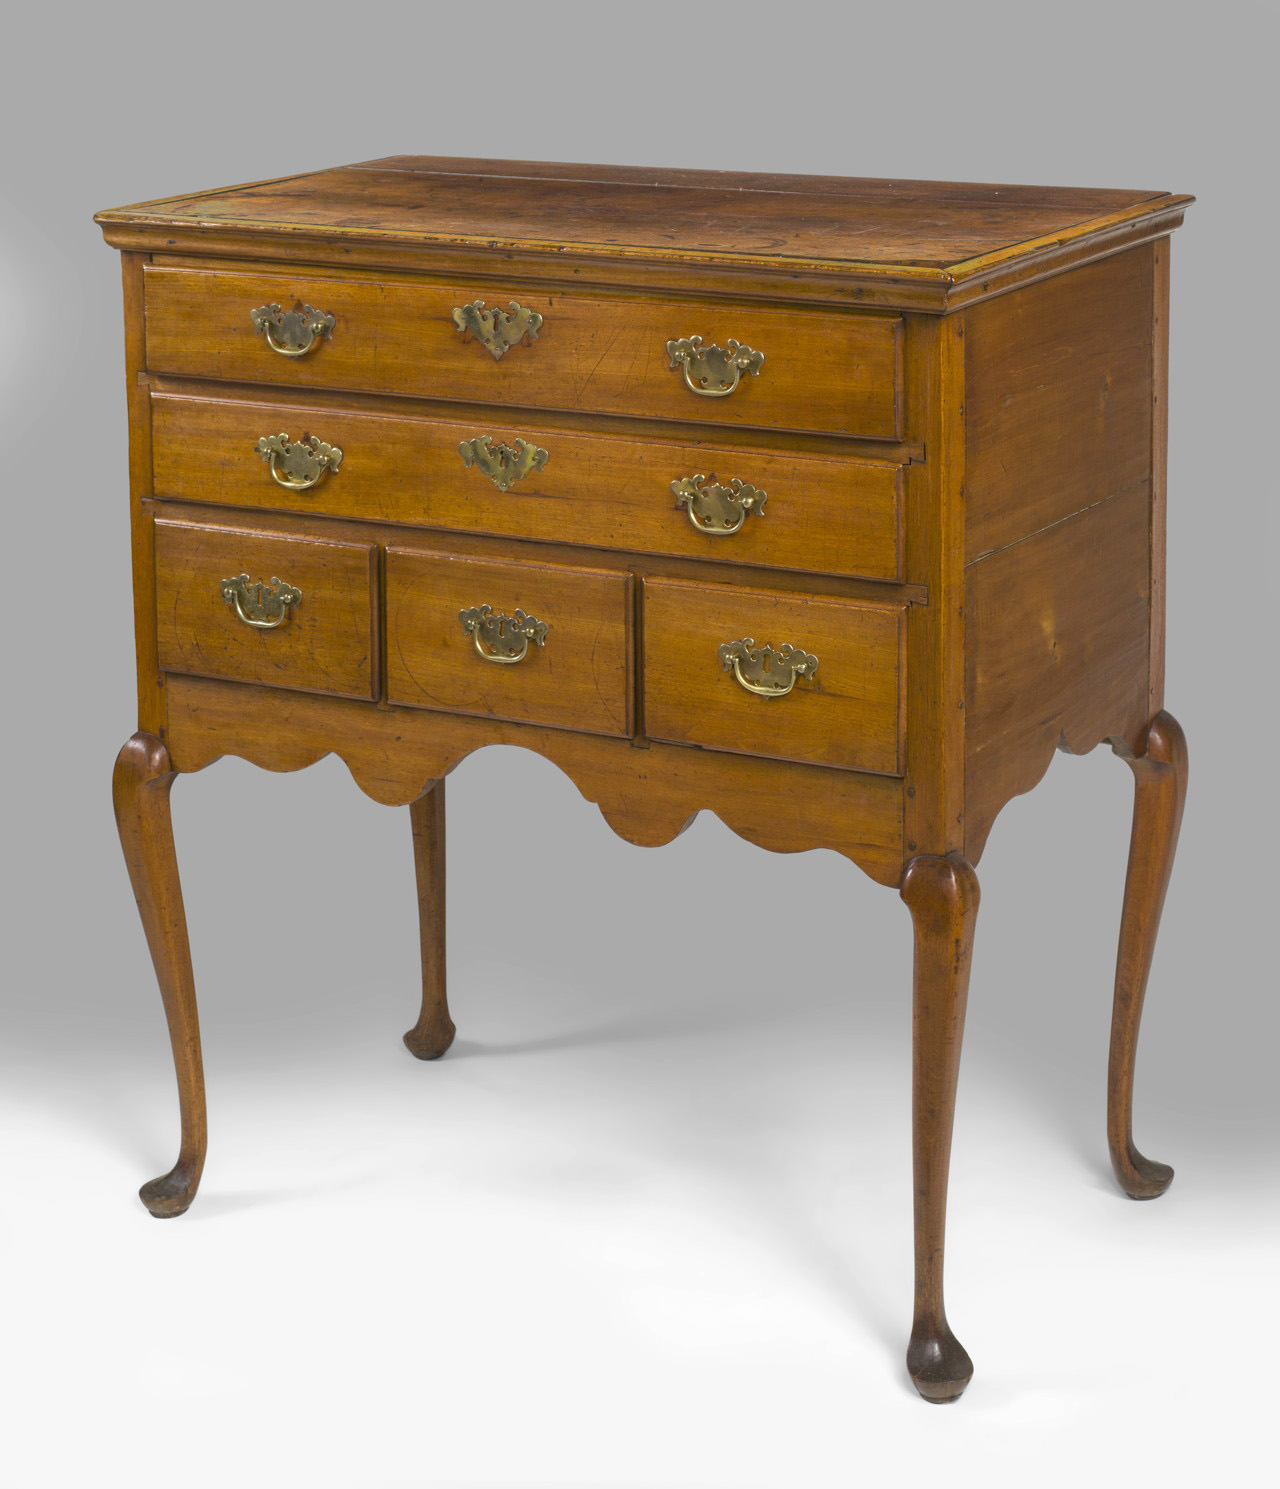 Sold at Auction: Seven-piece Colonial Furniture Co. Queen Anne